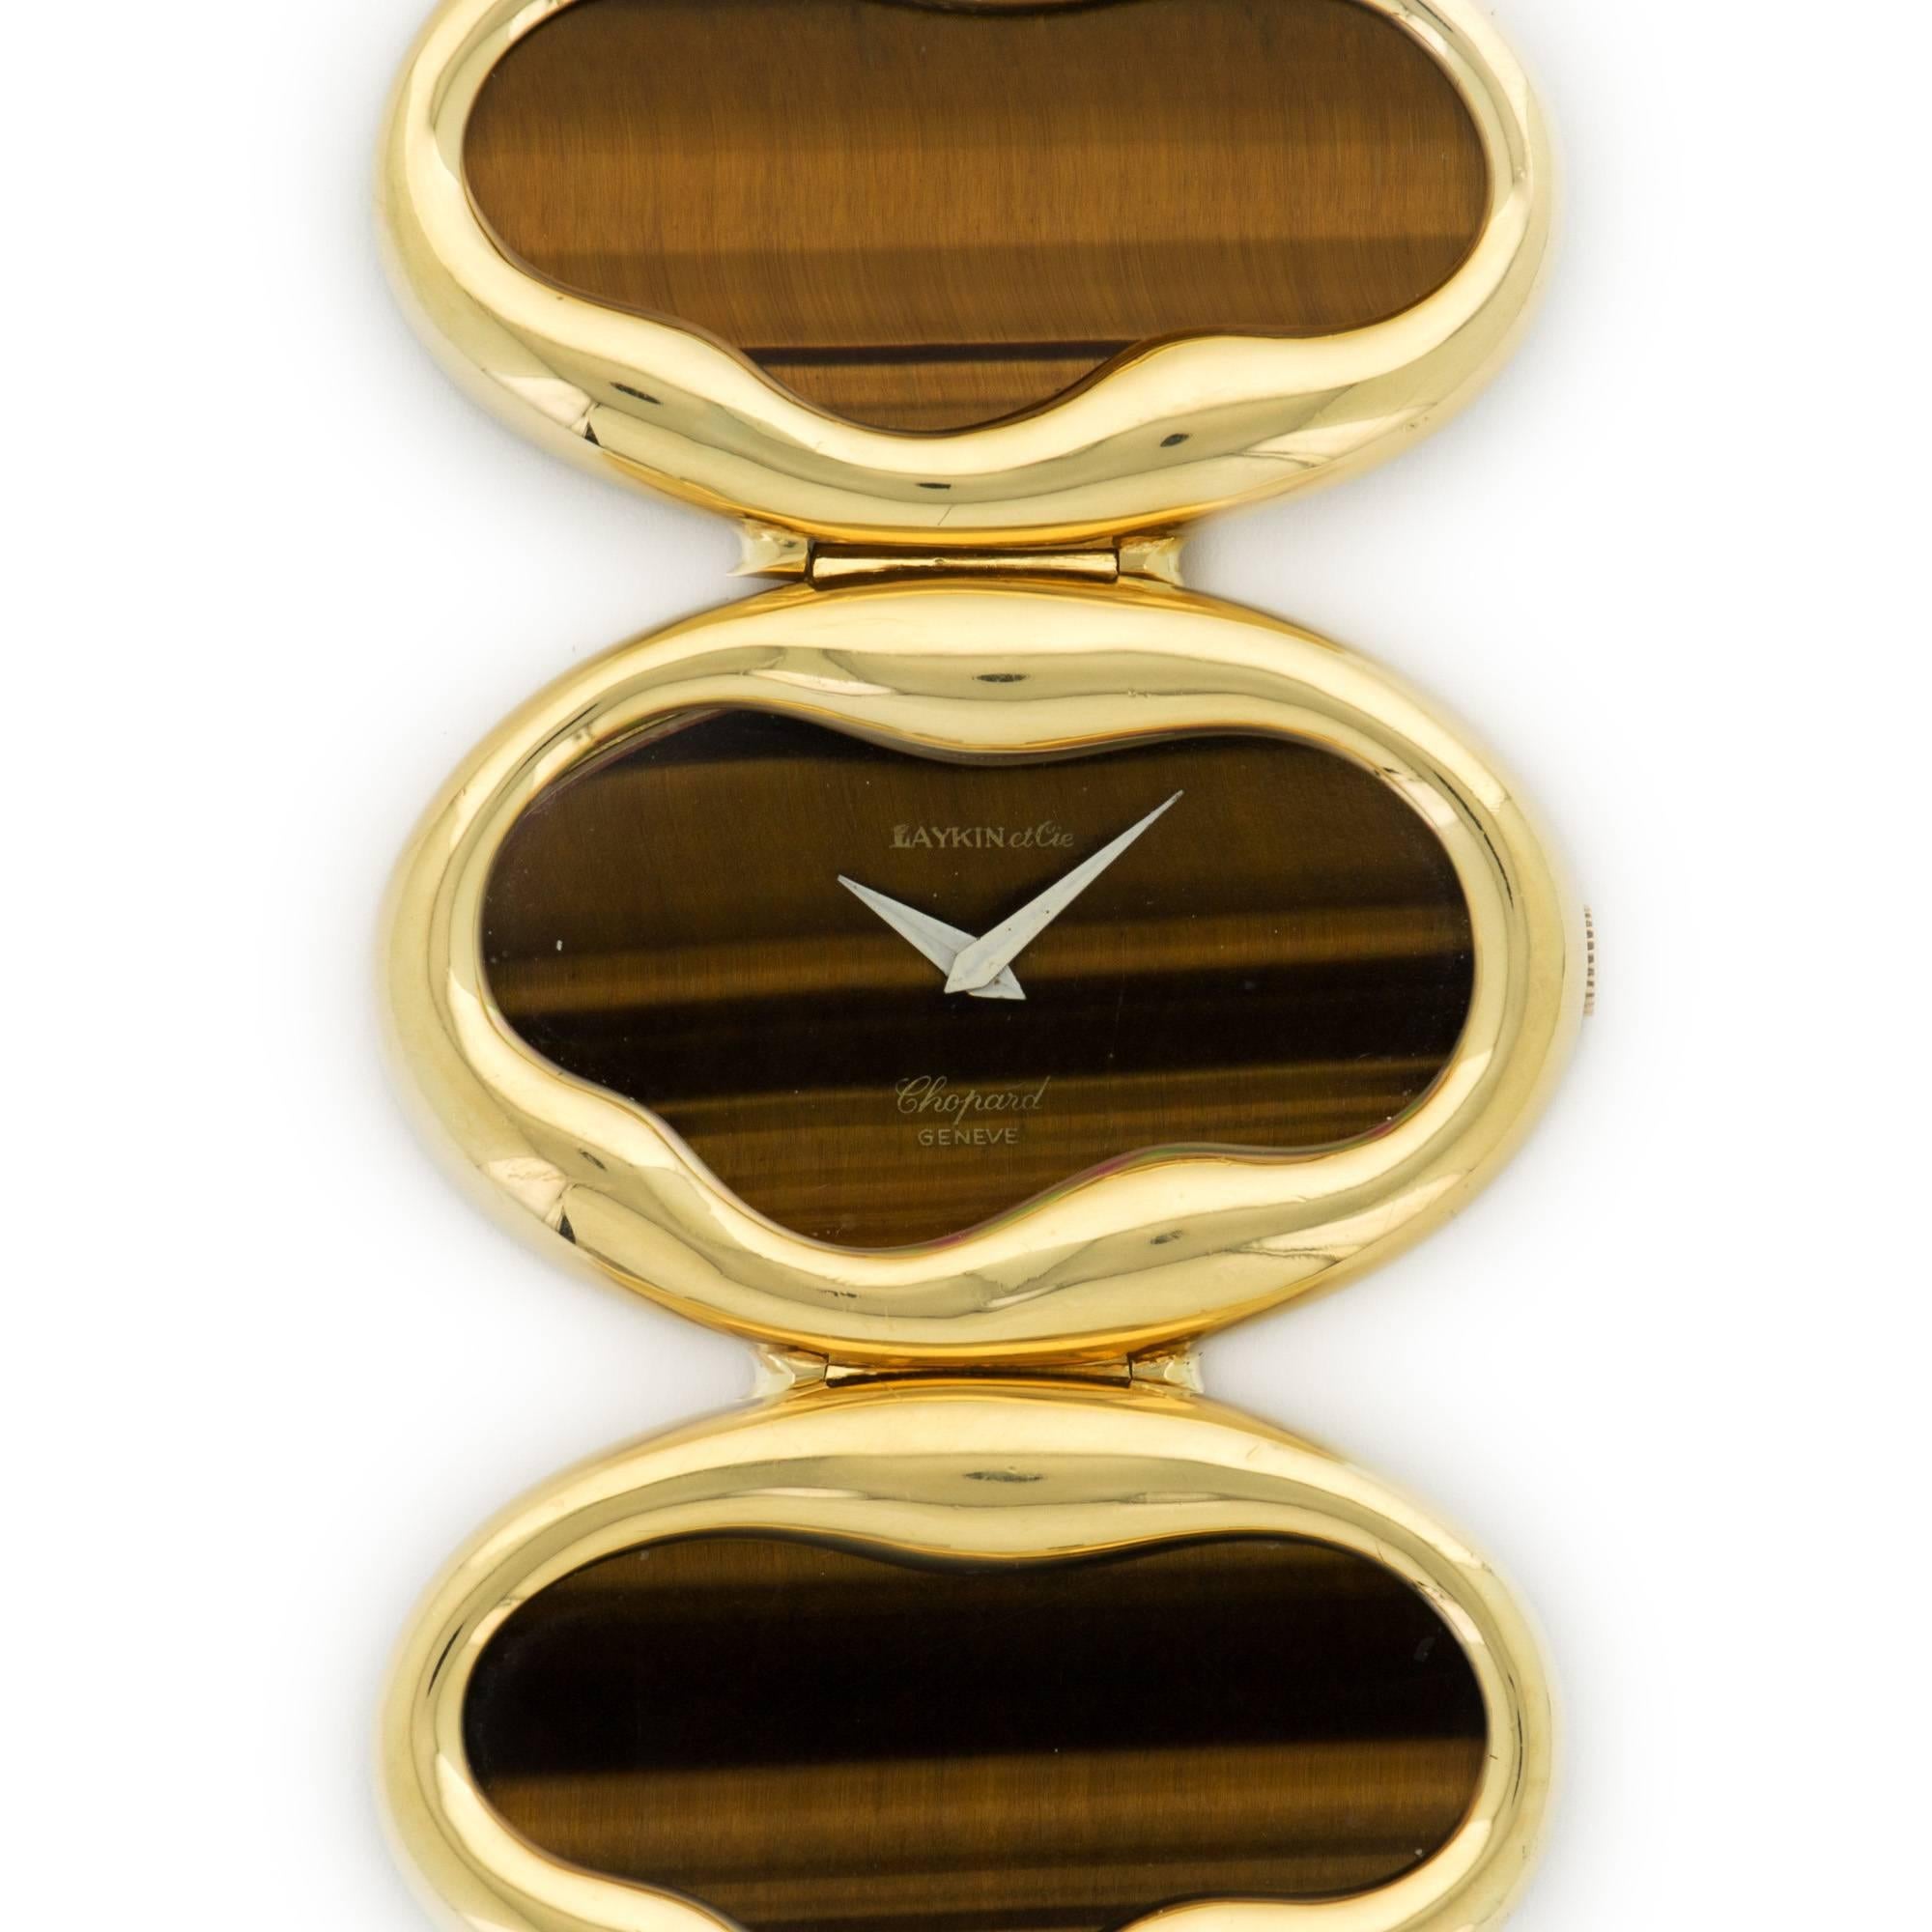 An Extraordinary and Substantial 18k Yellow Gold Bracelet Watch with Inlaid Tigers Eye, By Chopard. Circa 1975. A Truly Unique and Rare Timepiece. Originally Retailed by Laykin et Cie. What an Amazing Piece!